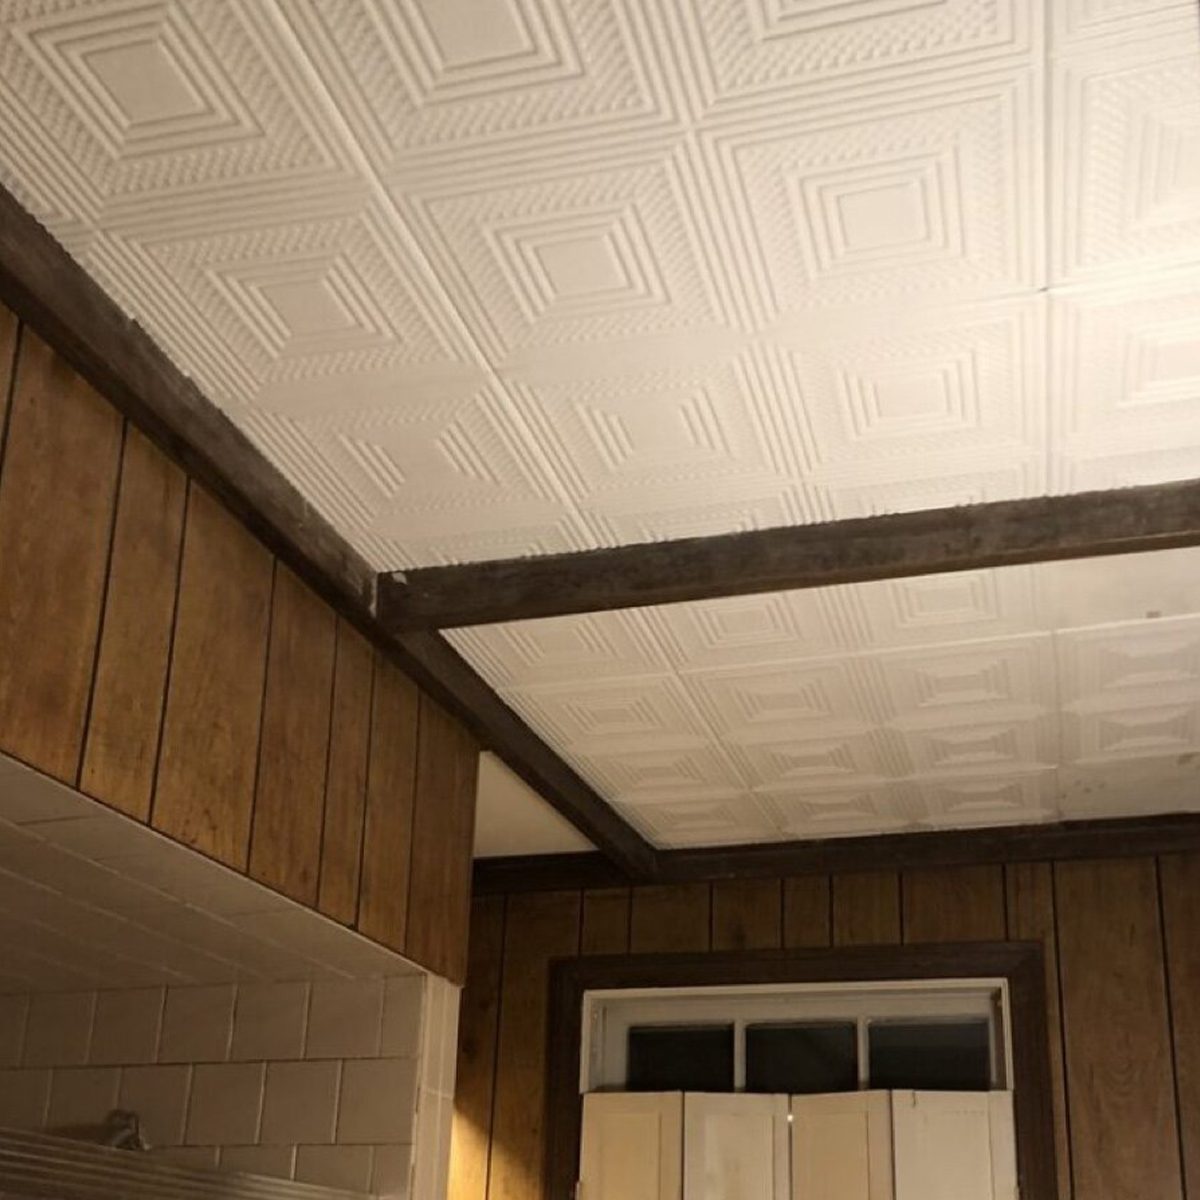 11 Ways To Er A Hideous Ceiling That Anyone Can Do